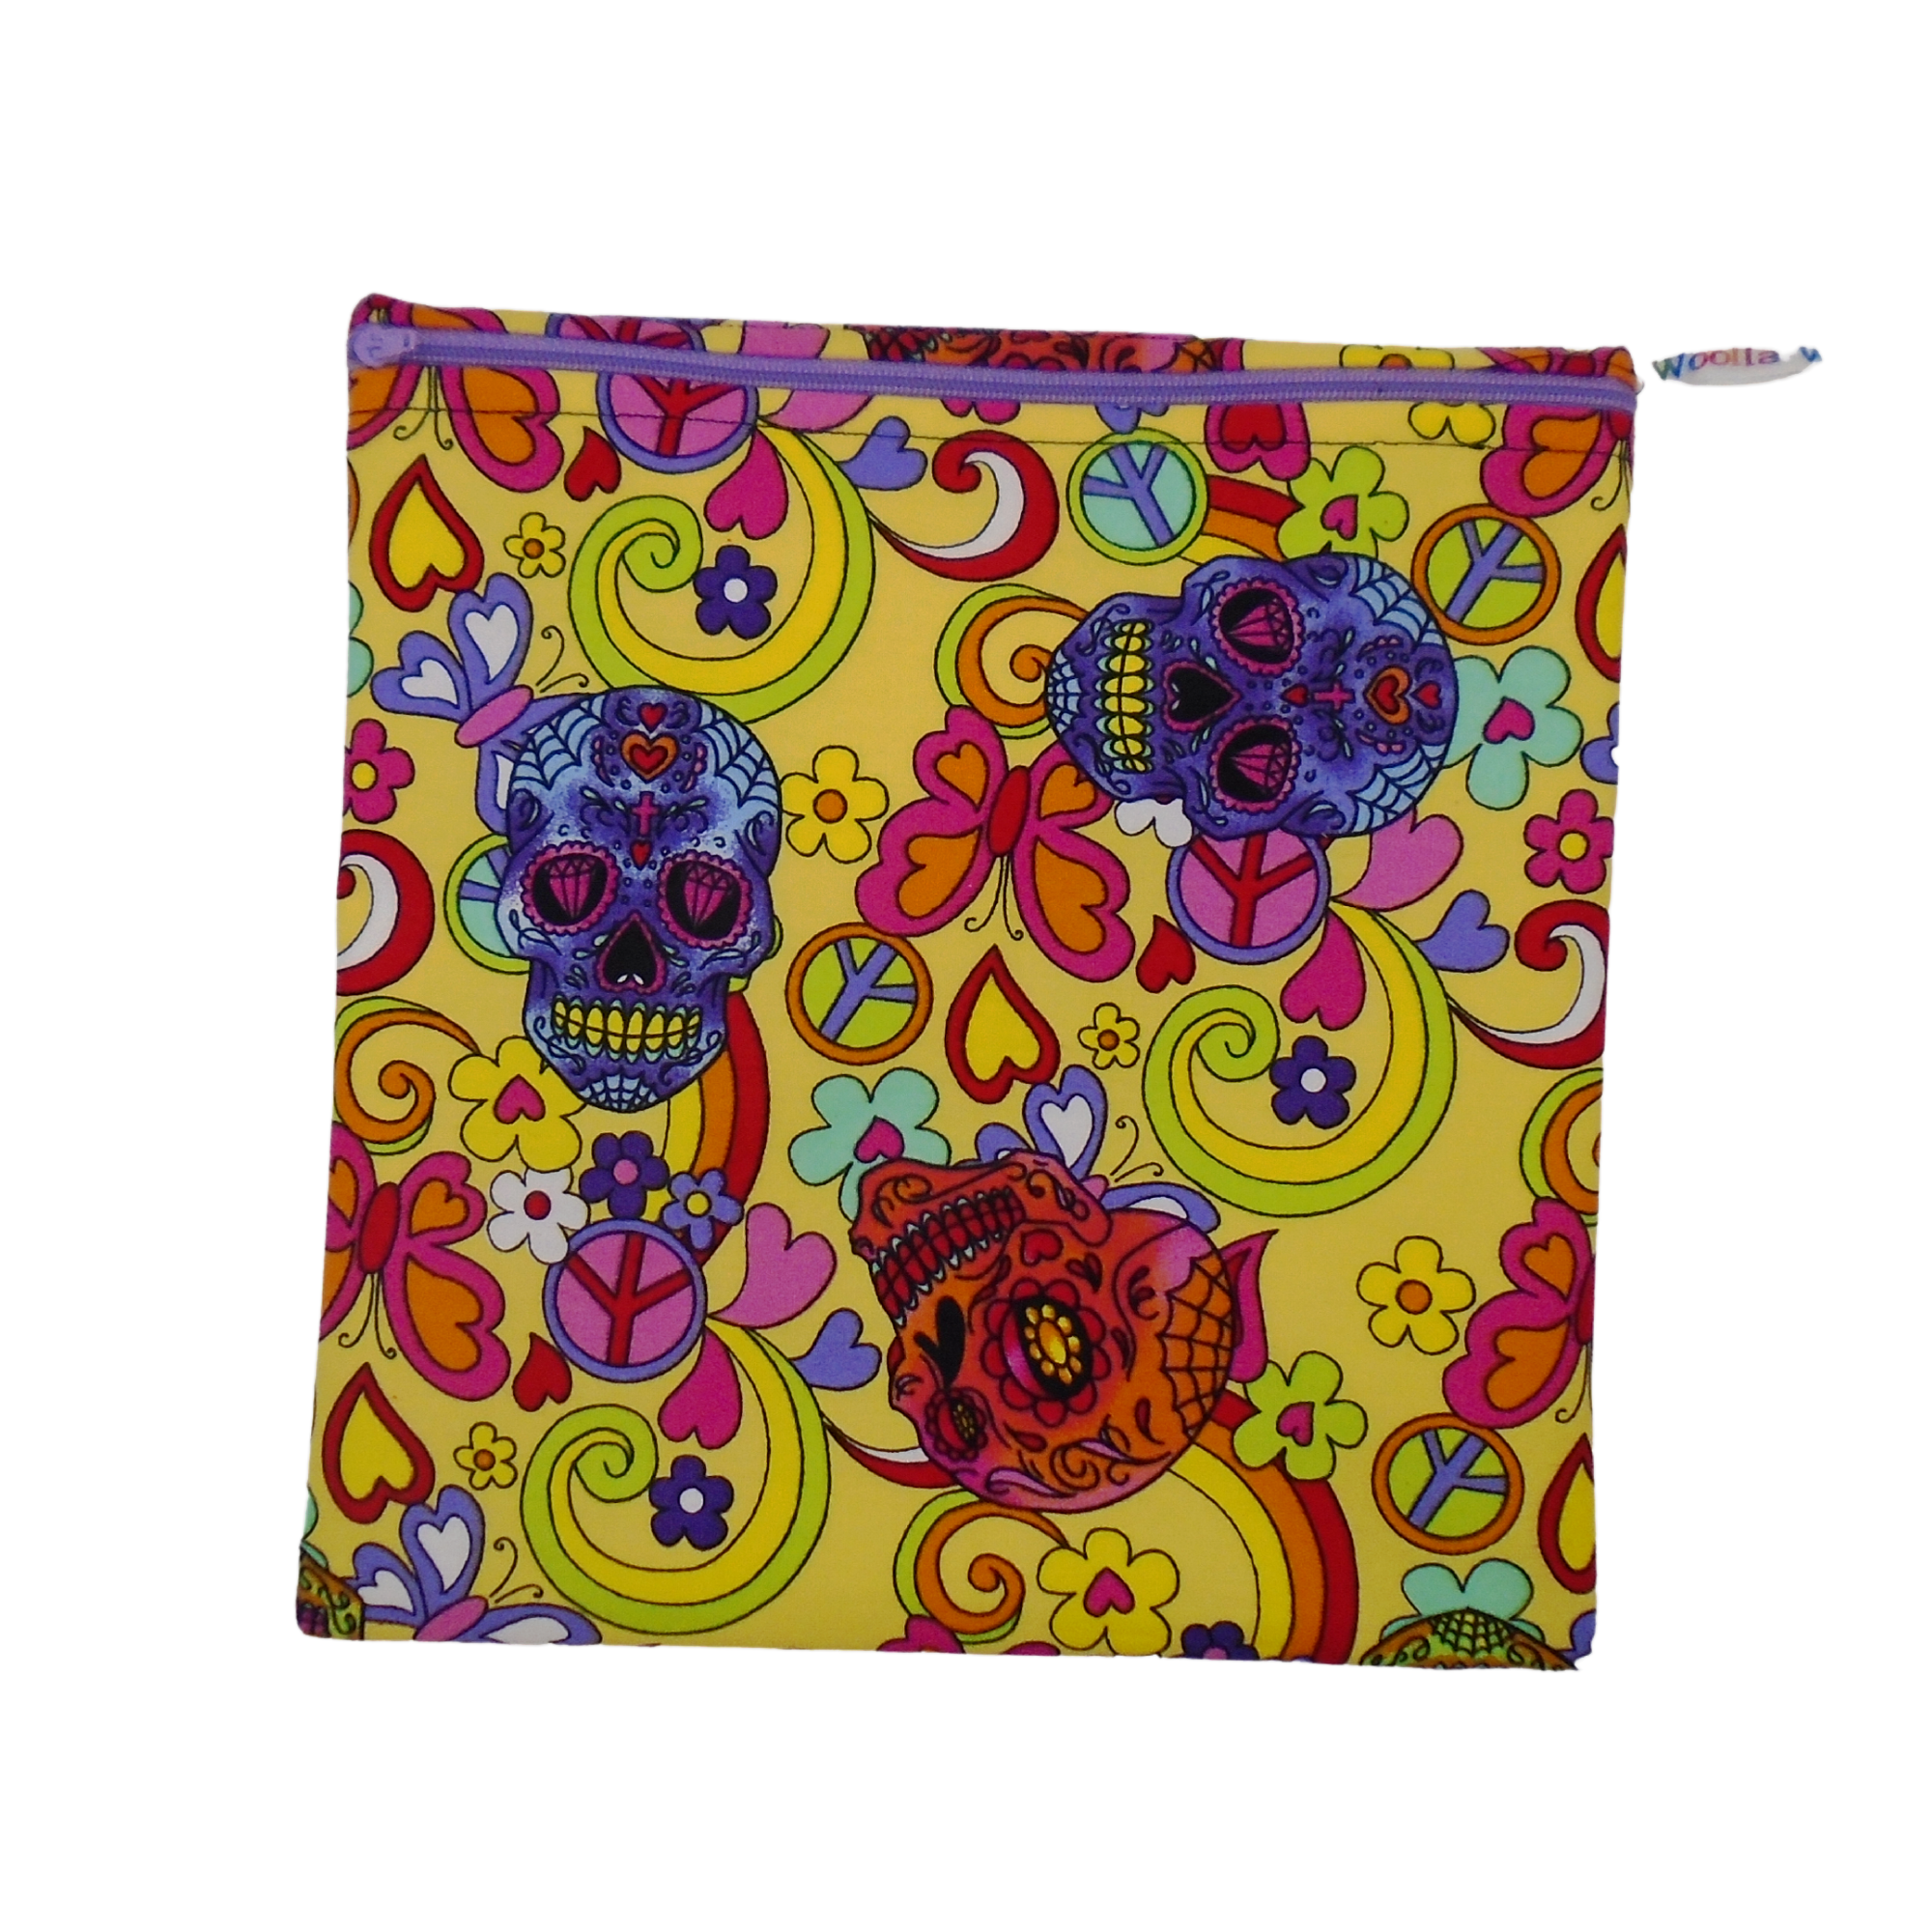 Yellow Sugar Skull - Large Poppins Pouch - Waterproof, Washable, Food Safe, Vegan, Lined Zip Bag